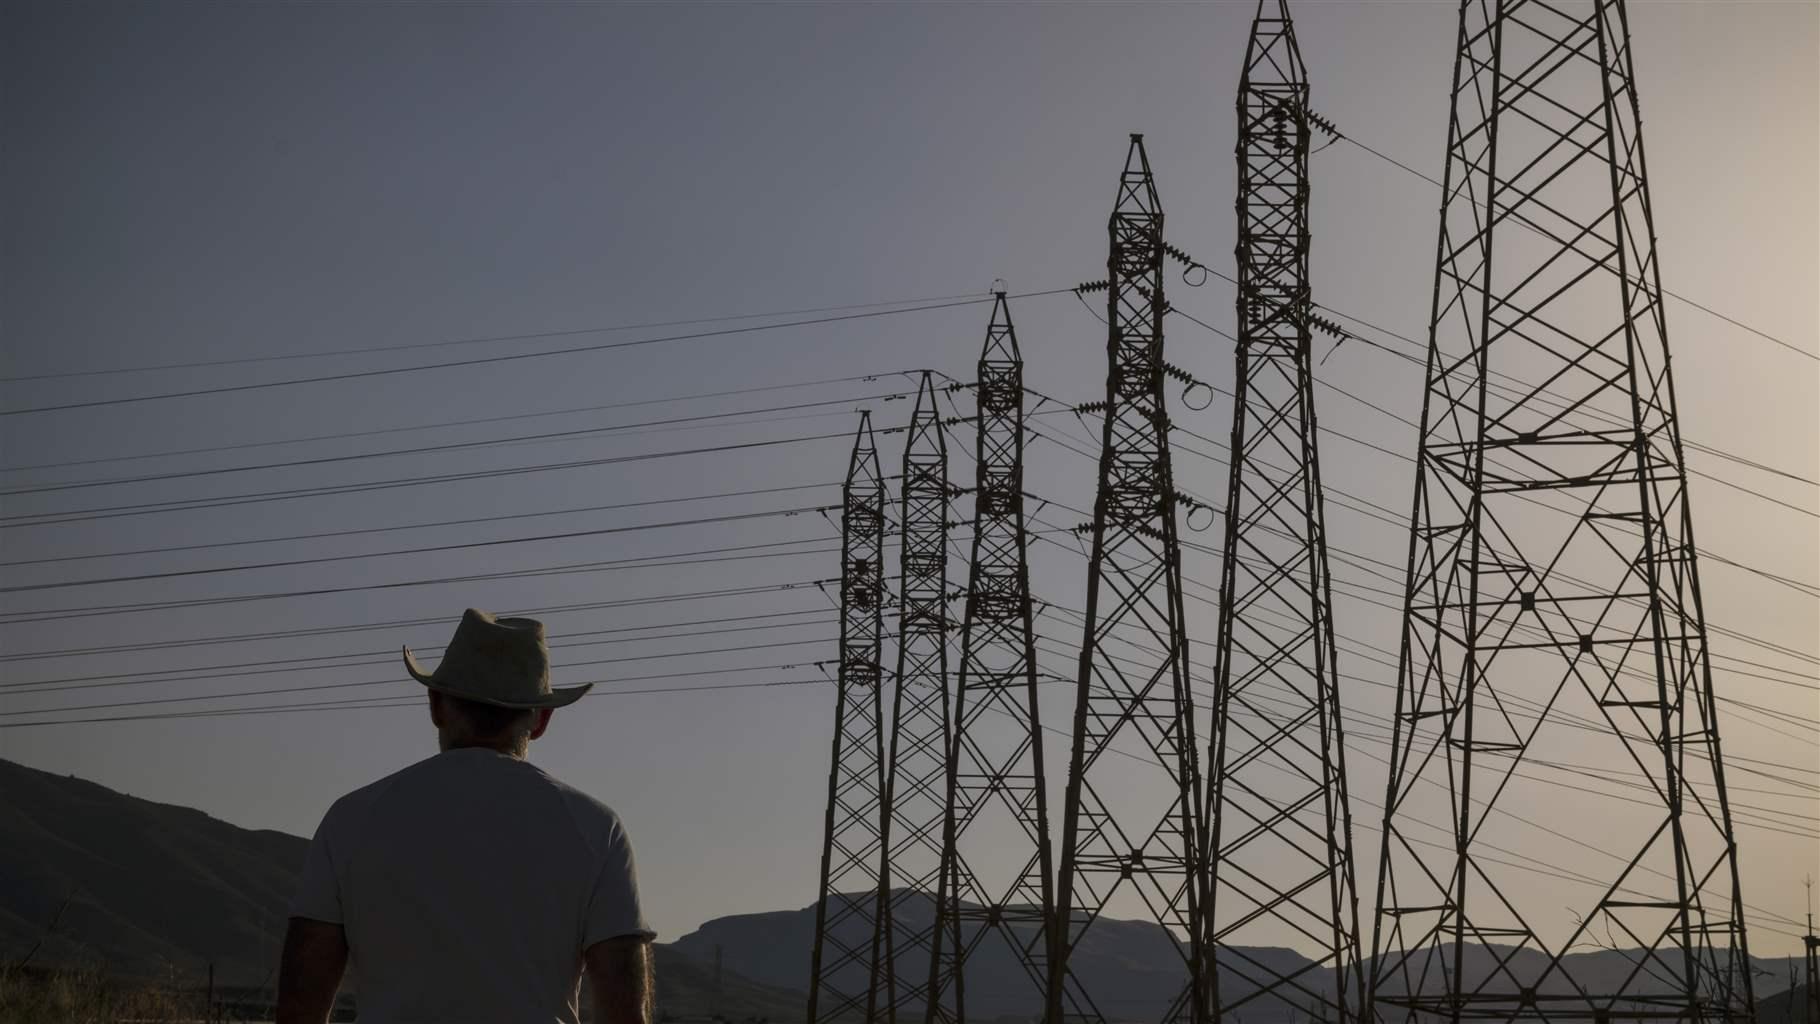 A person cloaked in shadow, wearing a cowboy hat and t-shirt, stands in front of an array of electrical transmission towers. The sky has the pale light of either sunset or dawn.